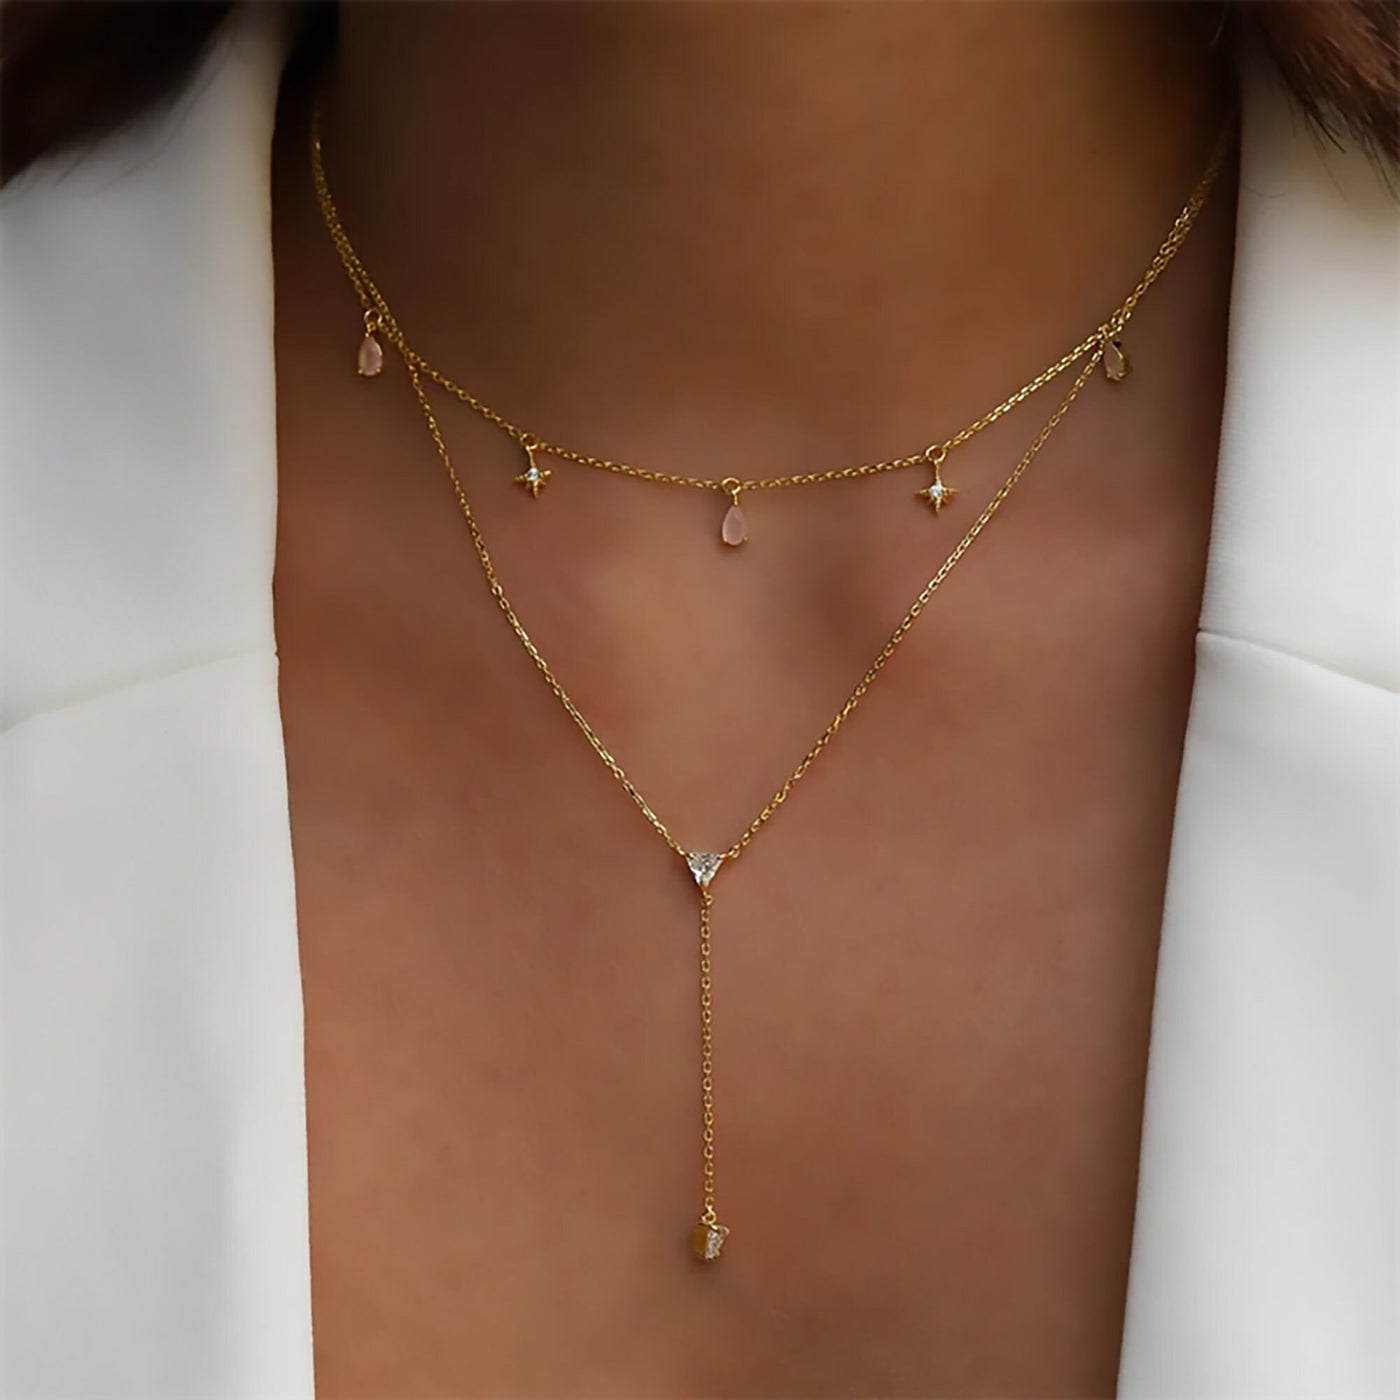 Star & Pear Dangle Necklace